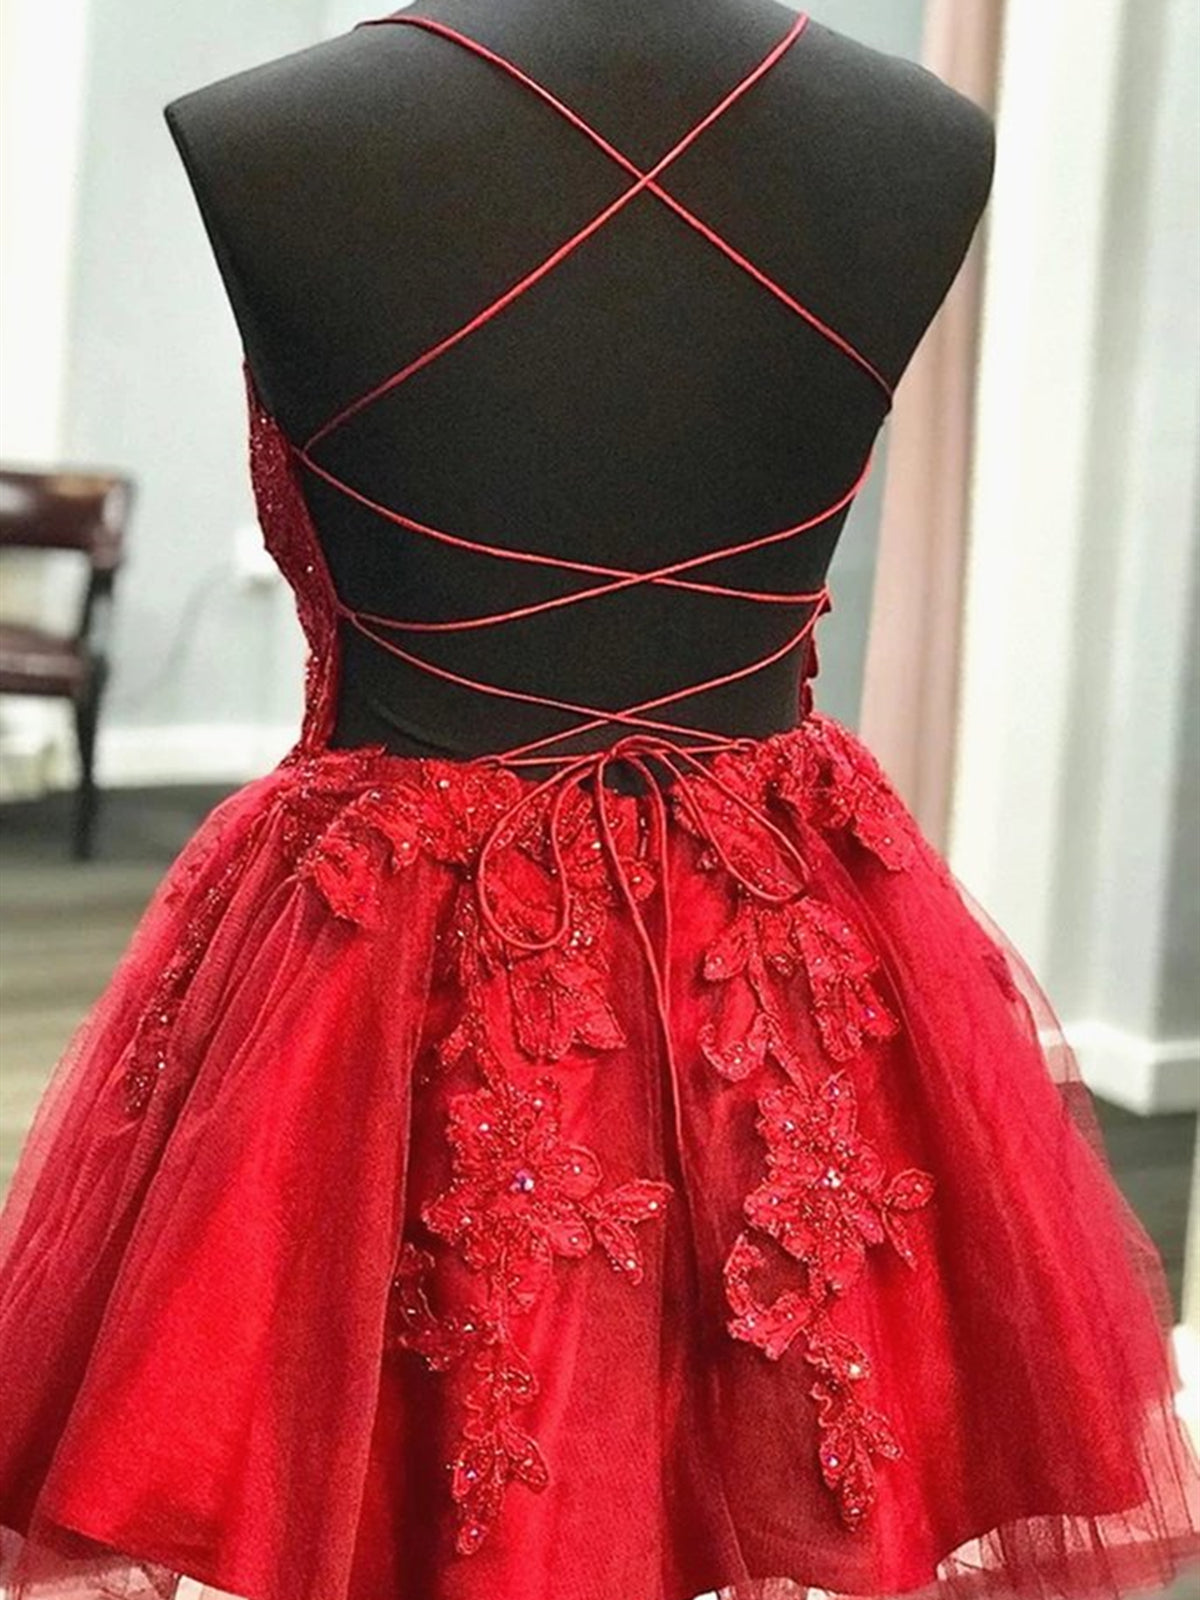 Party Dress Aesthetic, Short V Neck Red Lace Prom Dresses, V Neck Short Red Lace Graduation Homecoming Dresses